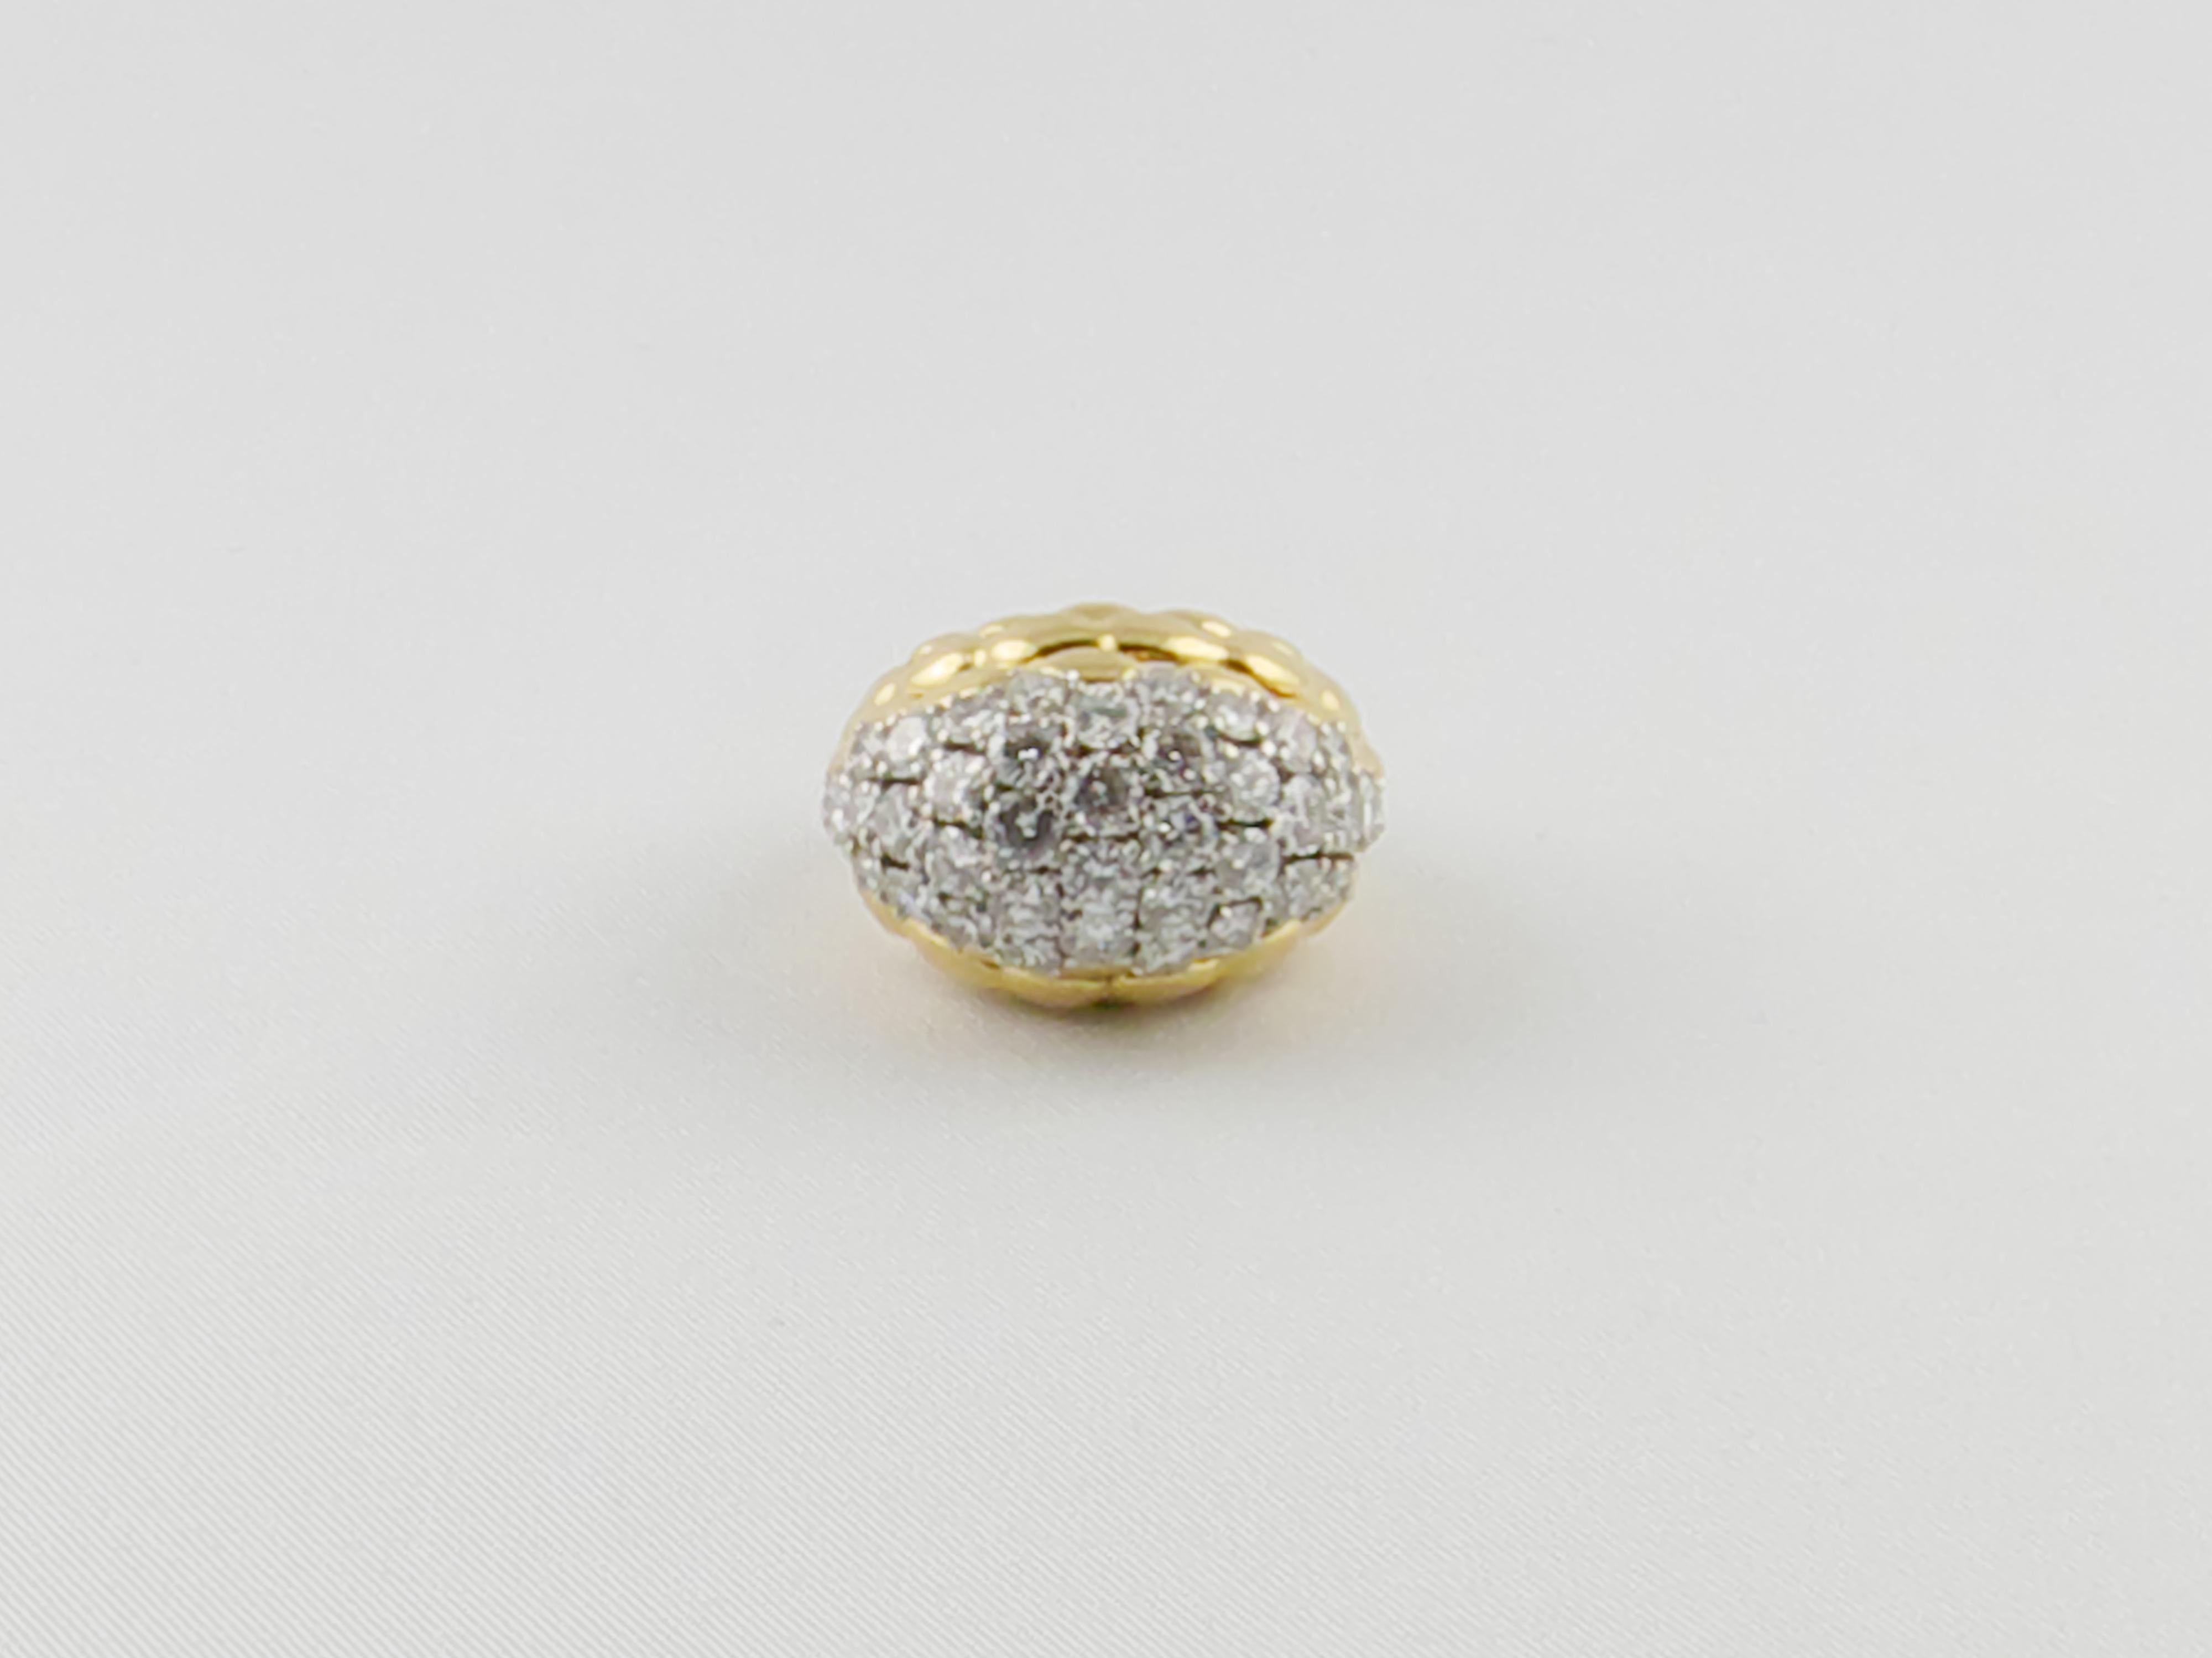 Gorgeous 1960s Boucheron 18k Yellow Gold Ring set with approx 3.0 carat brilliant cut diamonds  with an inimitable style created through an  uncompromising attention to detail, together with the finest materials. This extremely elegant and